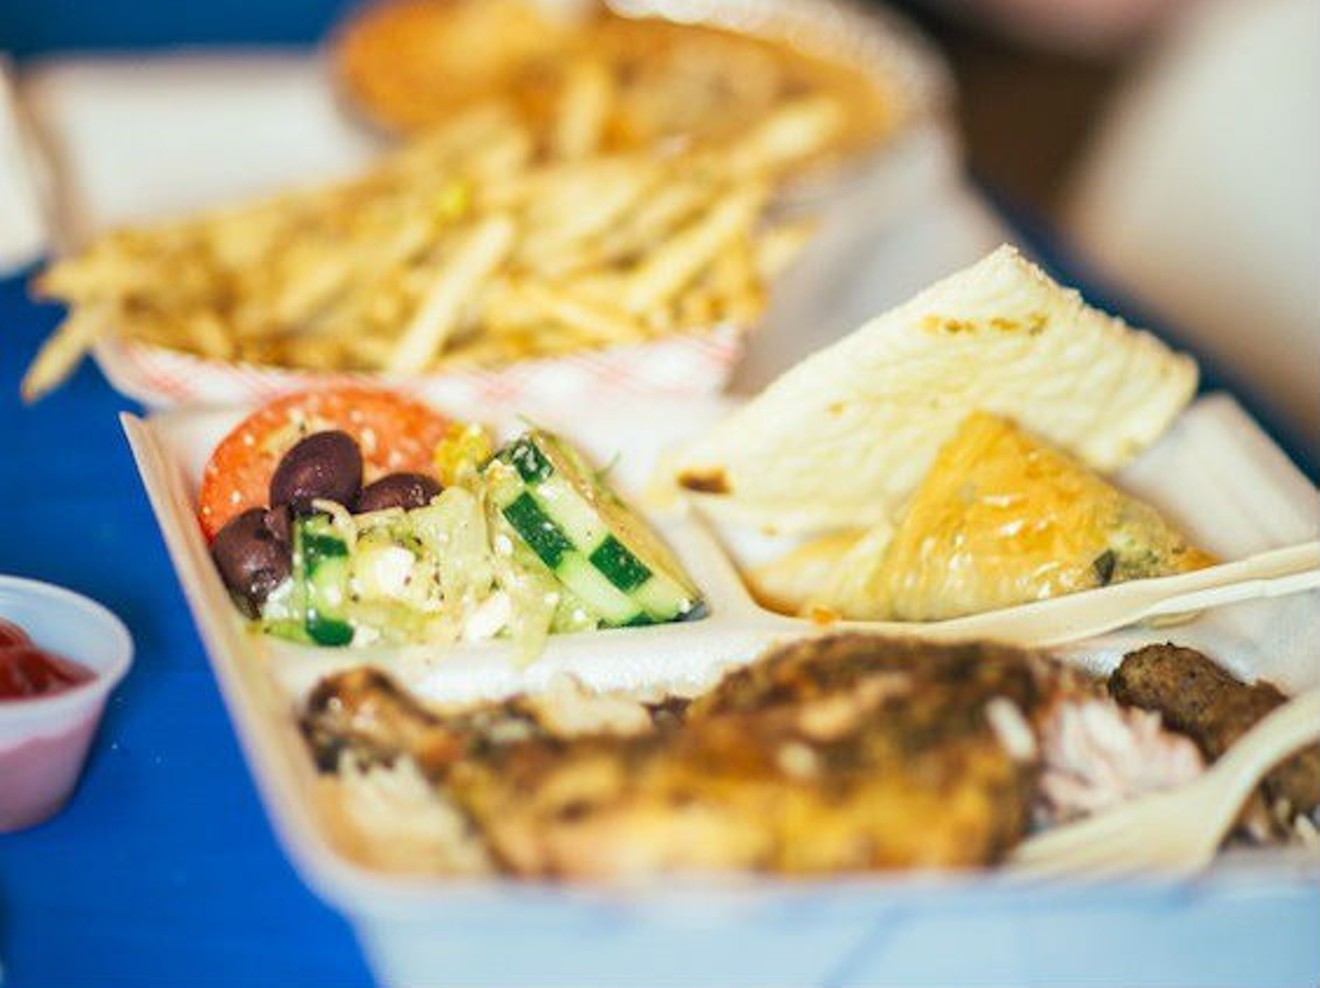 A few of the offerings from the 2014 Greek Food Festival of Dallas.